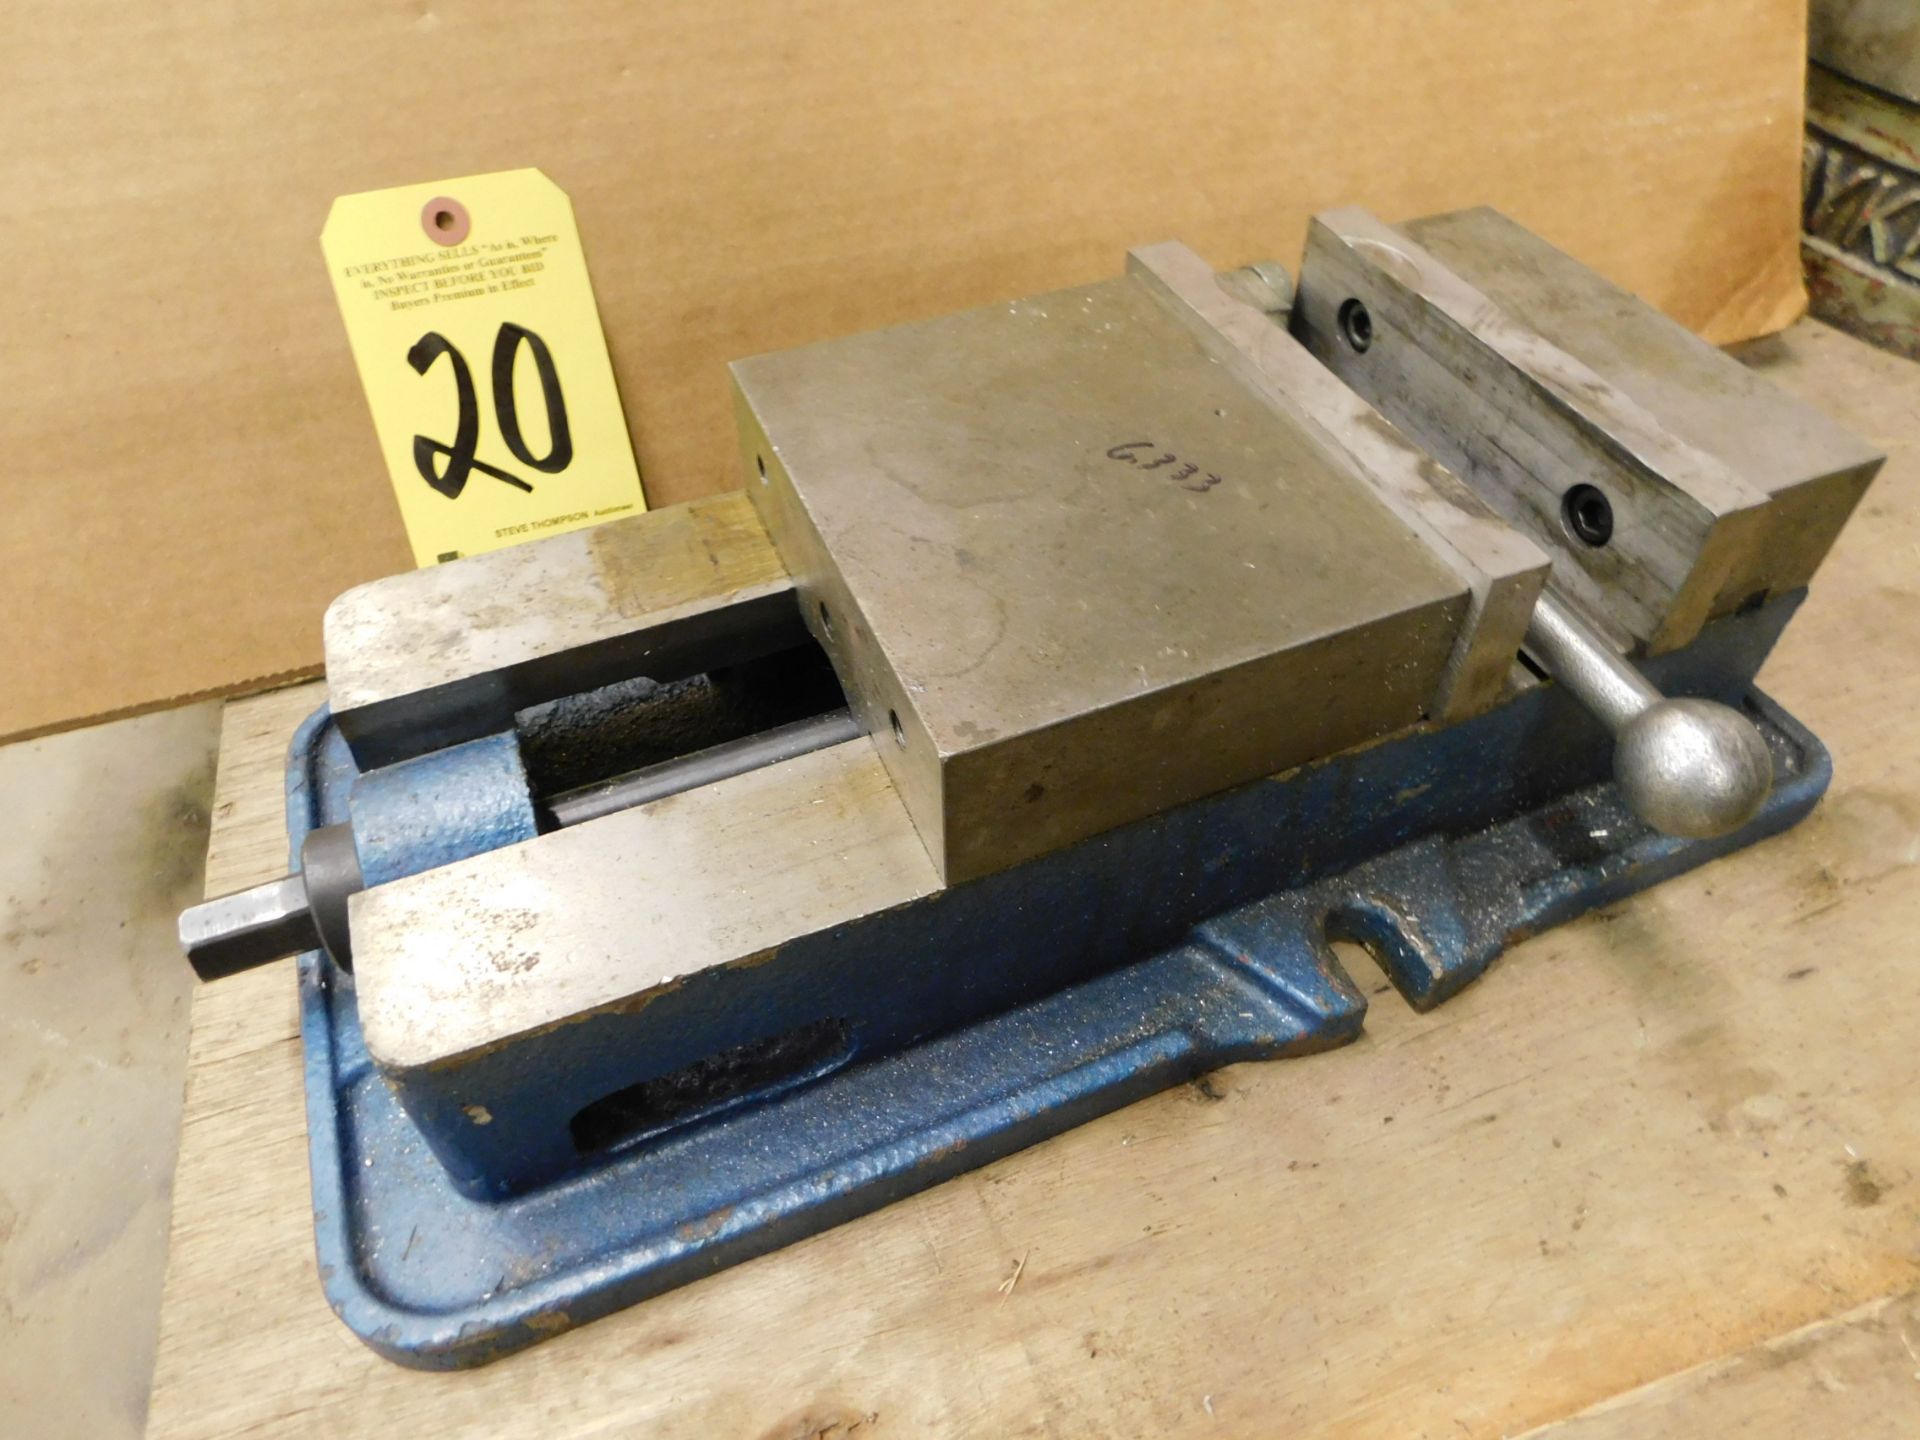 6" Mill Vise, Lot Location: 301 Poor Dr., Warsaw, IN, 46580